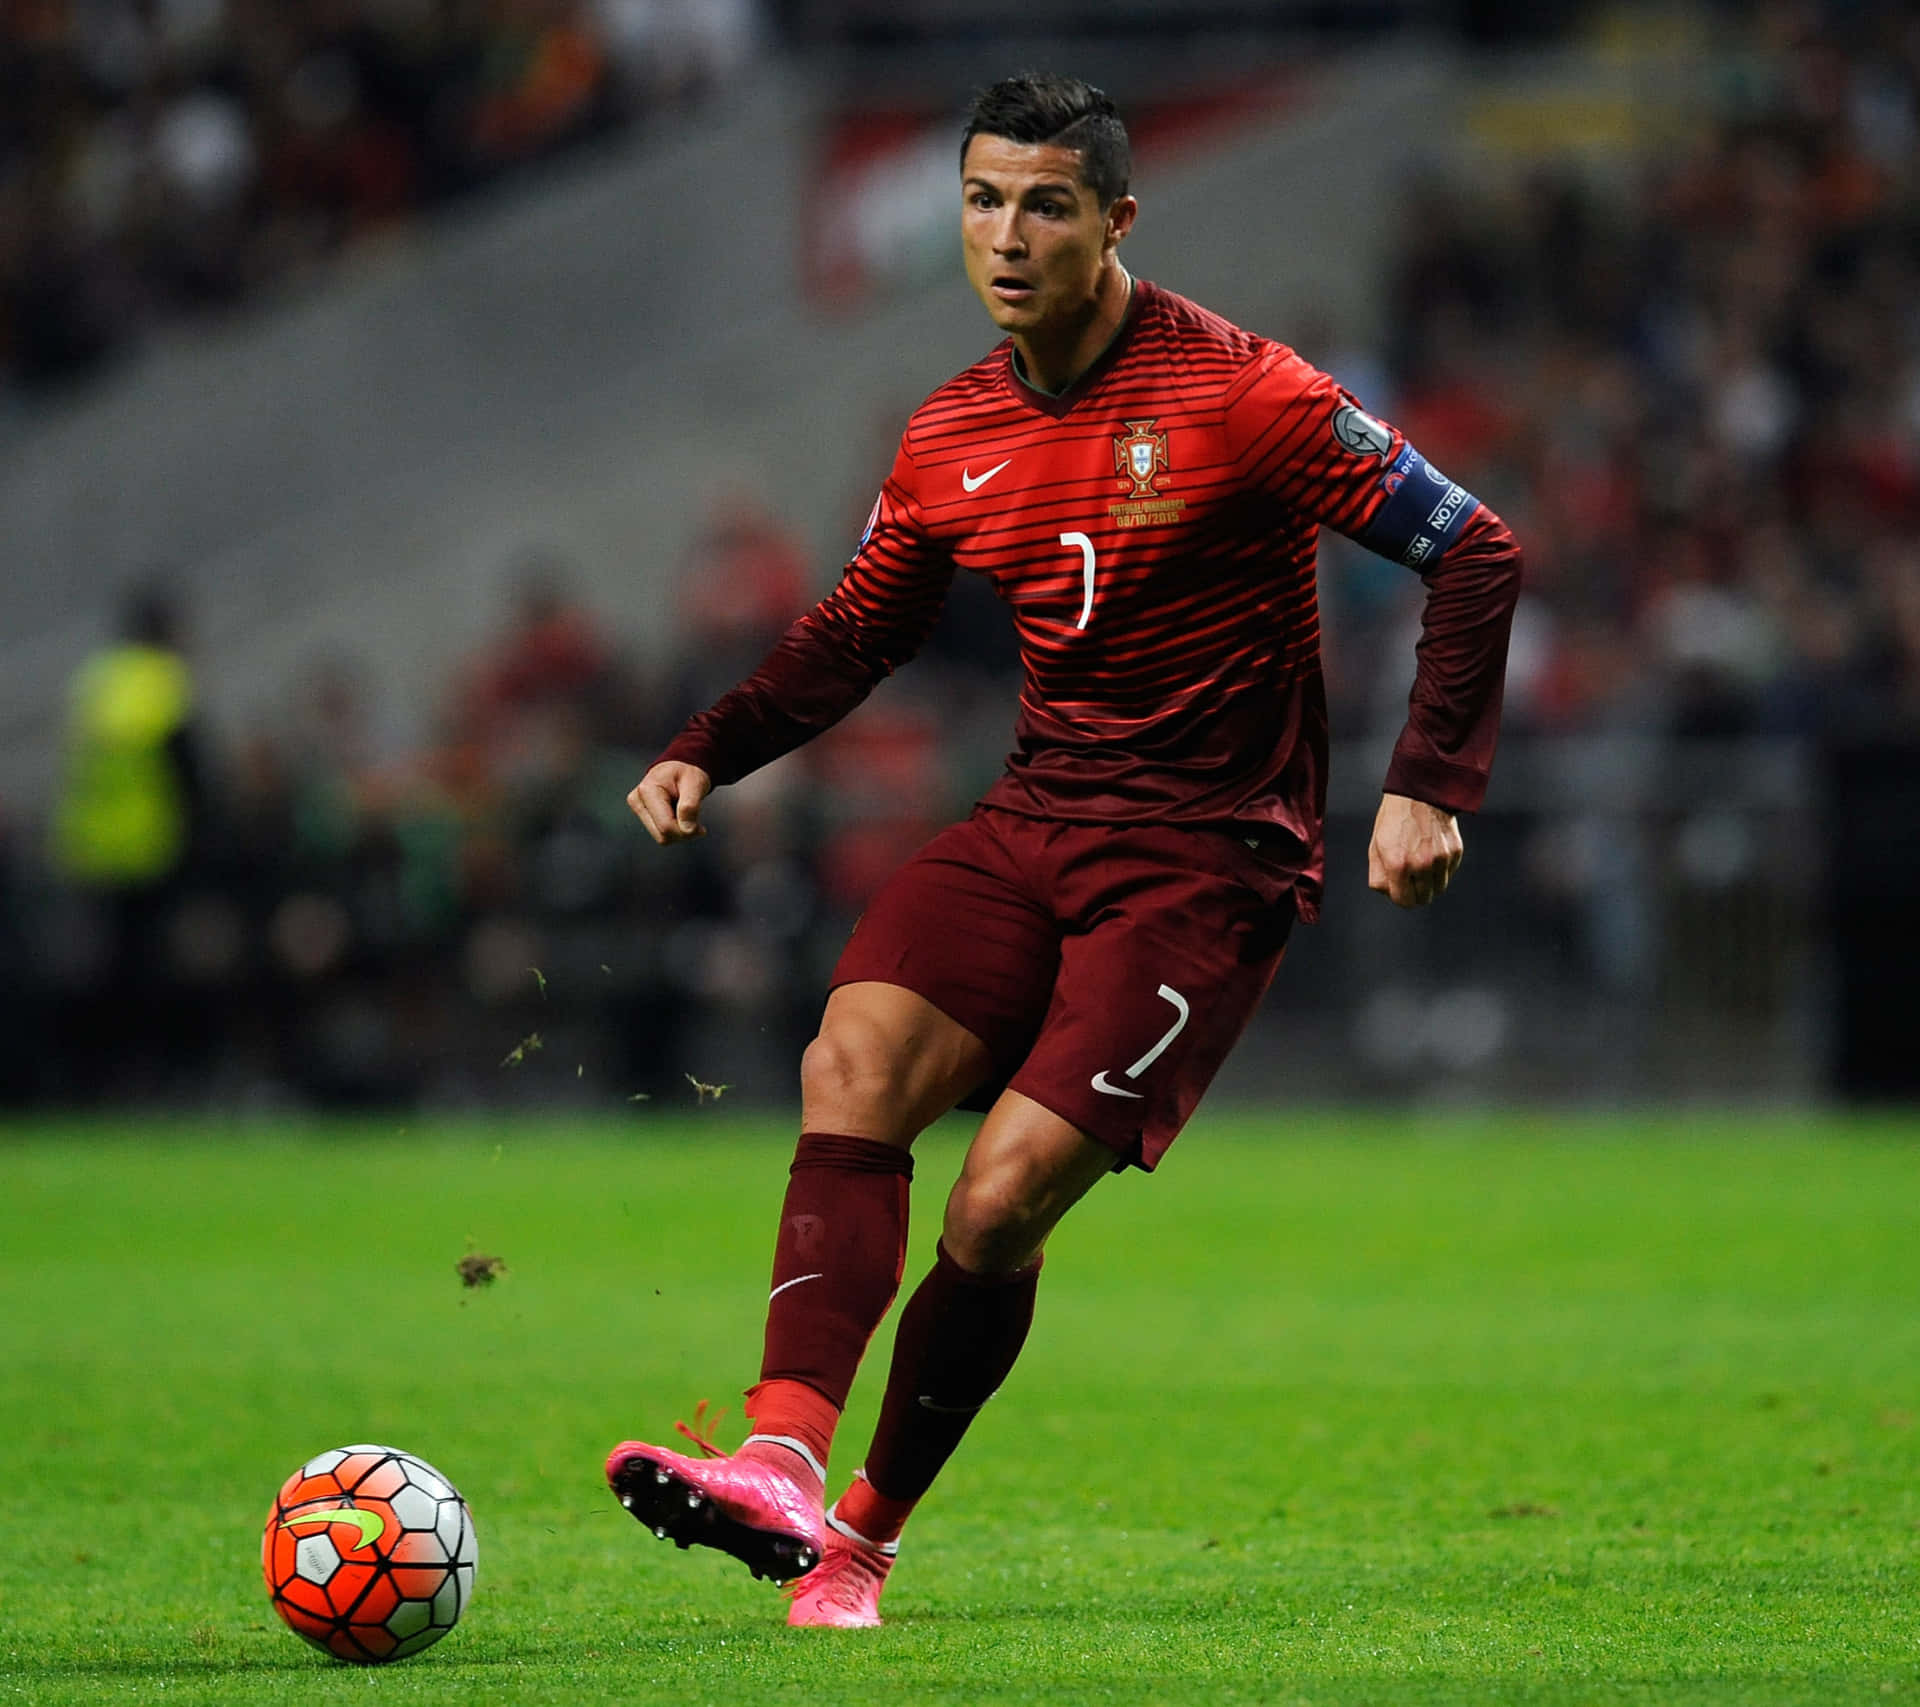 Cristiano Ronaldo in Action on the Field